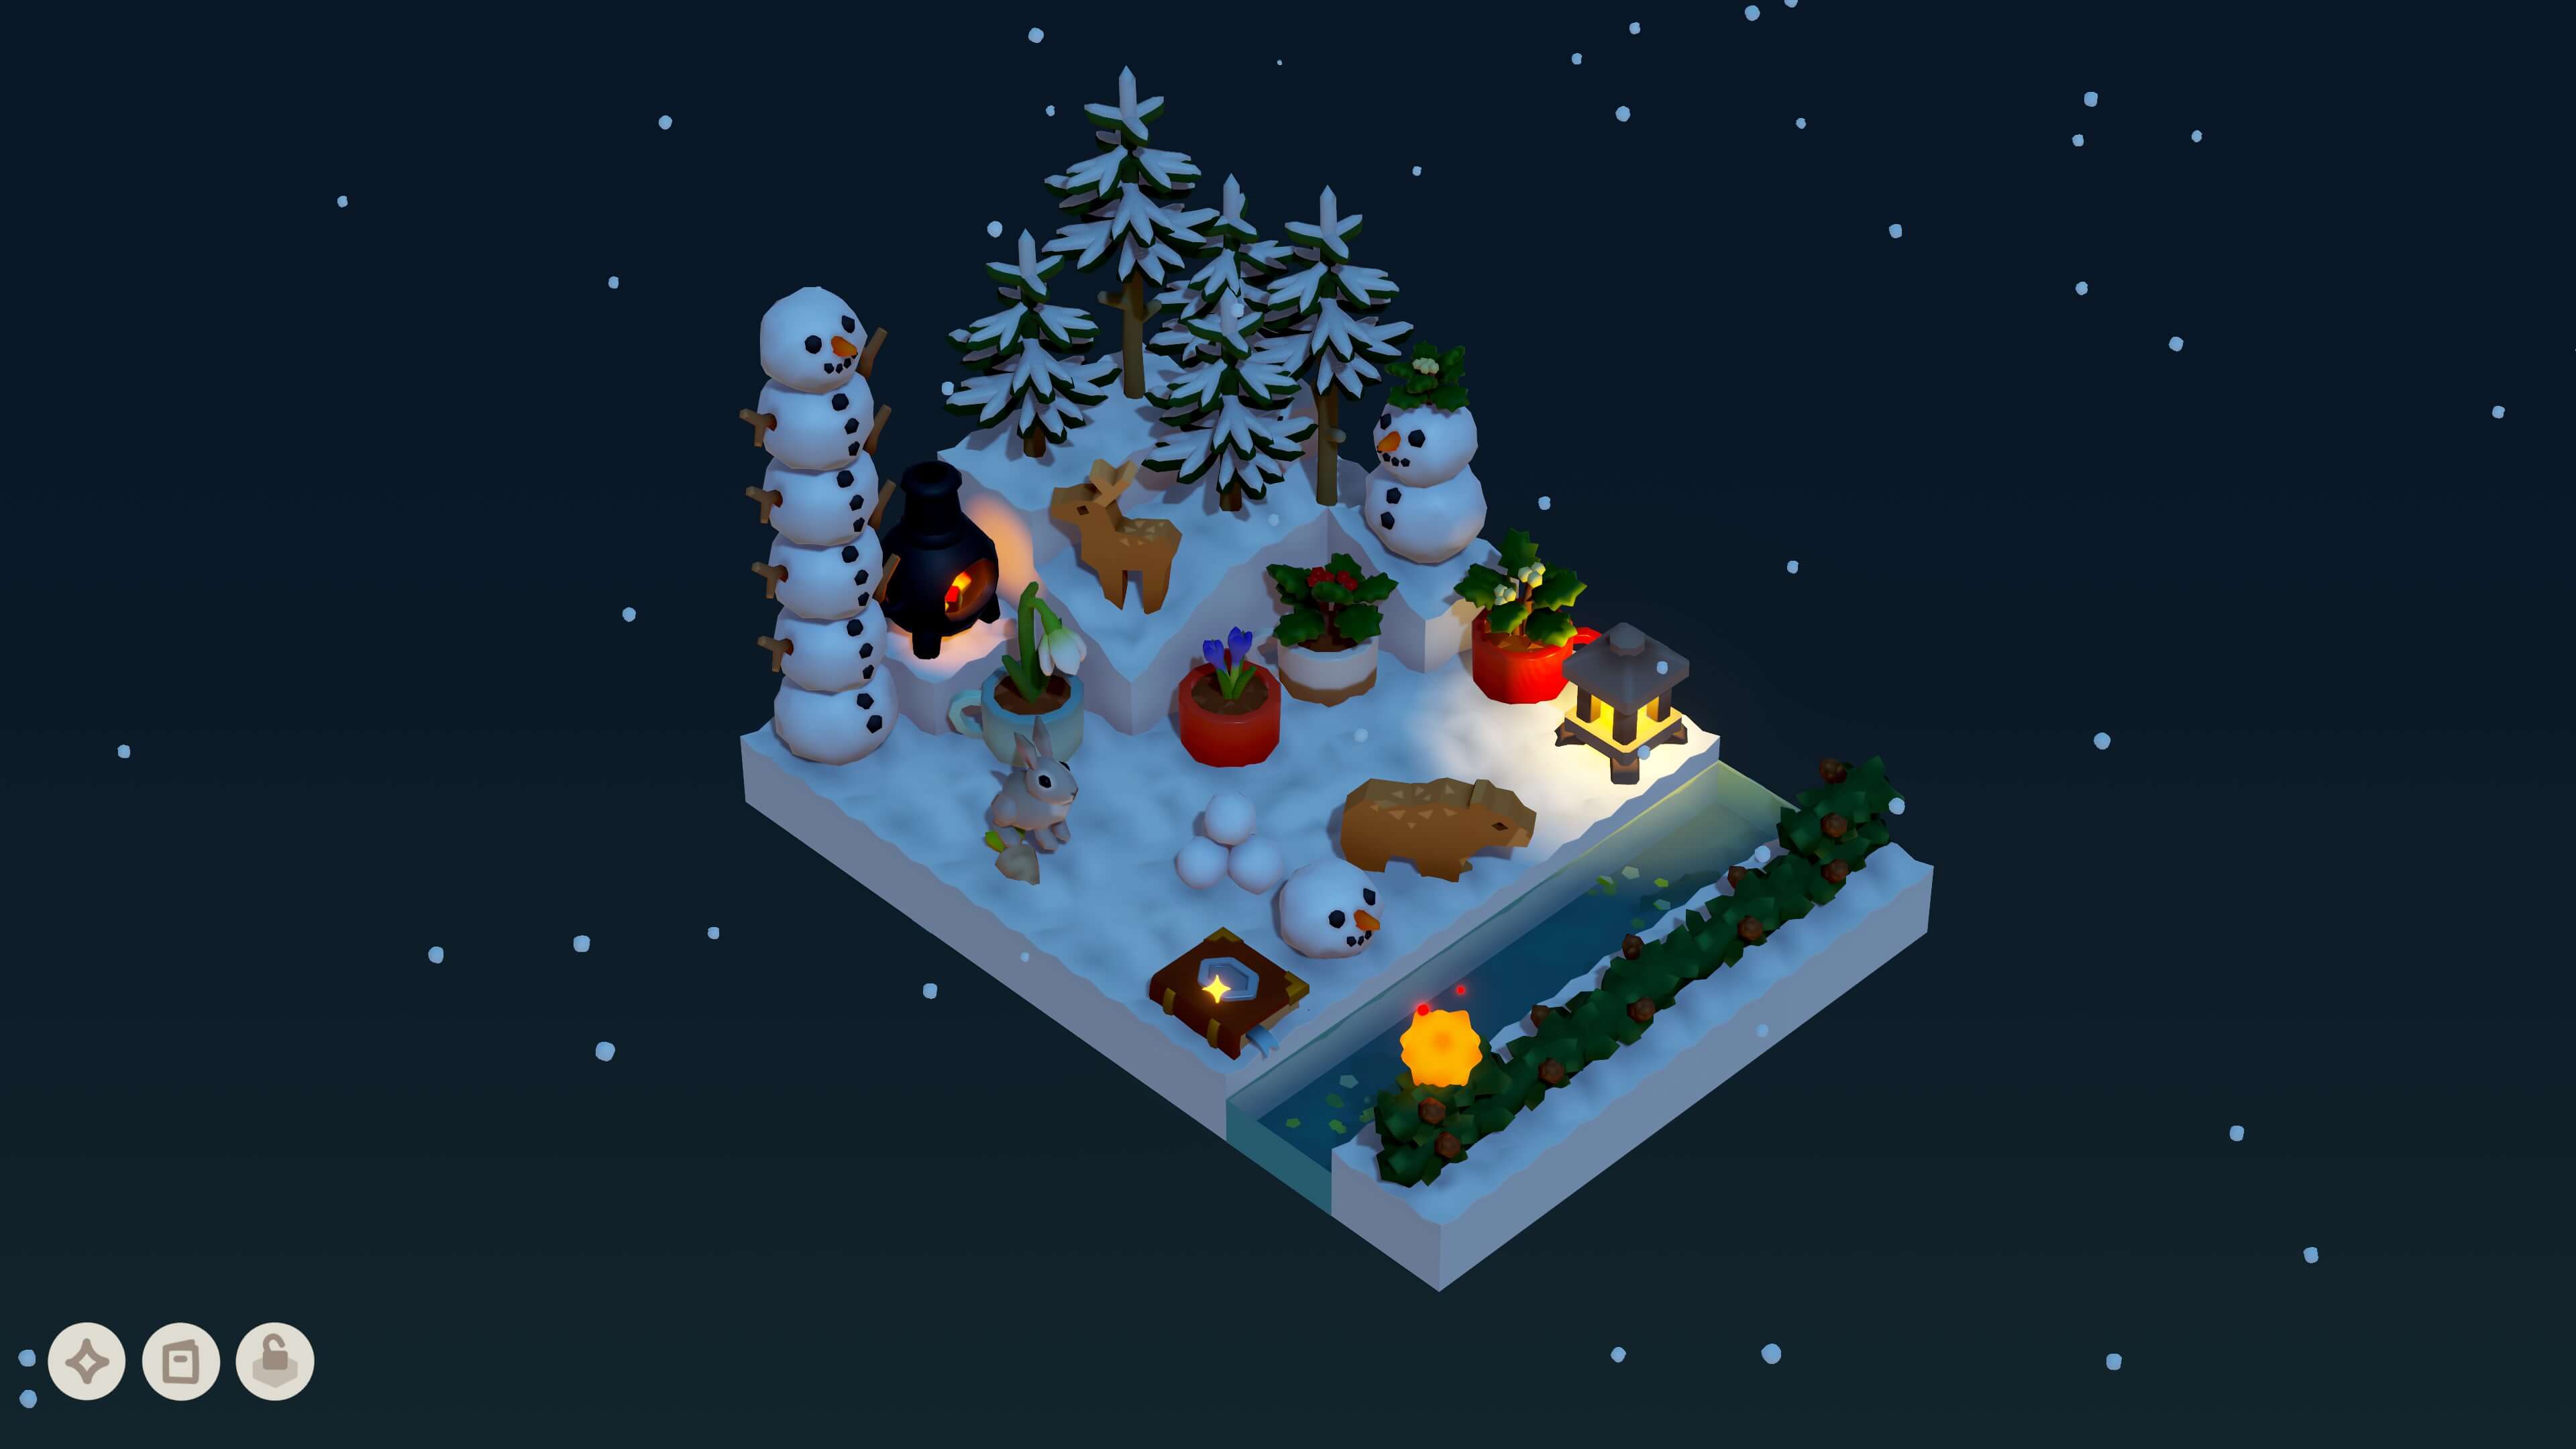 Game screenshot: a cozy winter night scene with several snowmen, winter plants, and lights. The art style is cute and isometric.